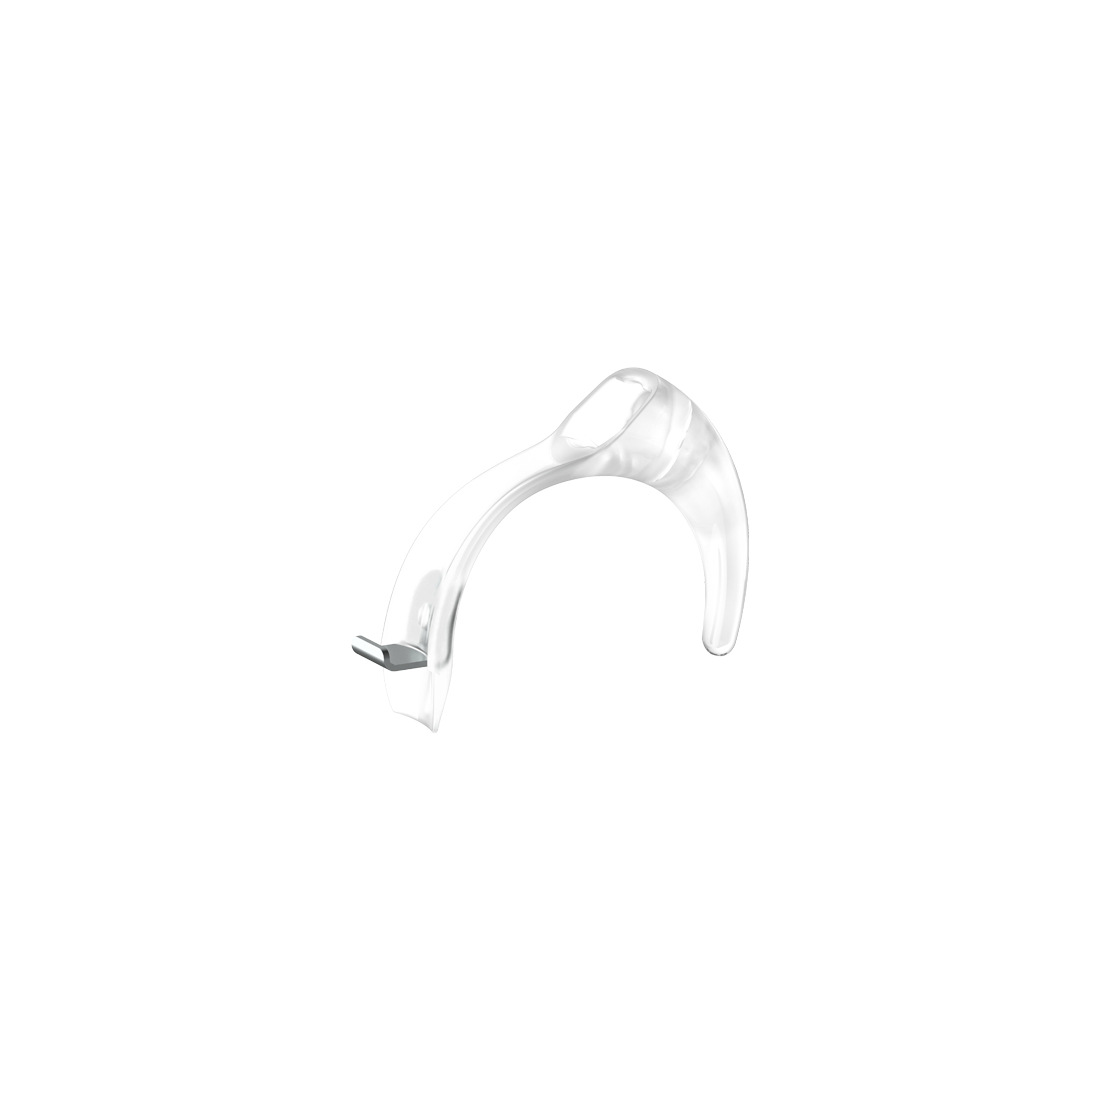 shop-cochlear-tamper-resistant-earhook-cochlear-americas